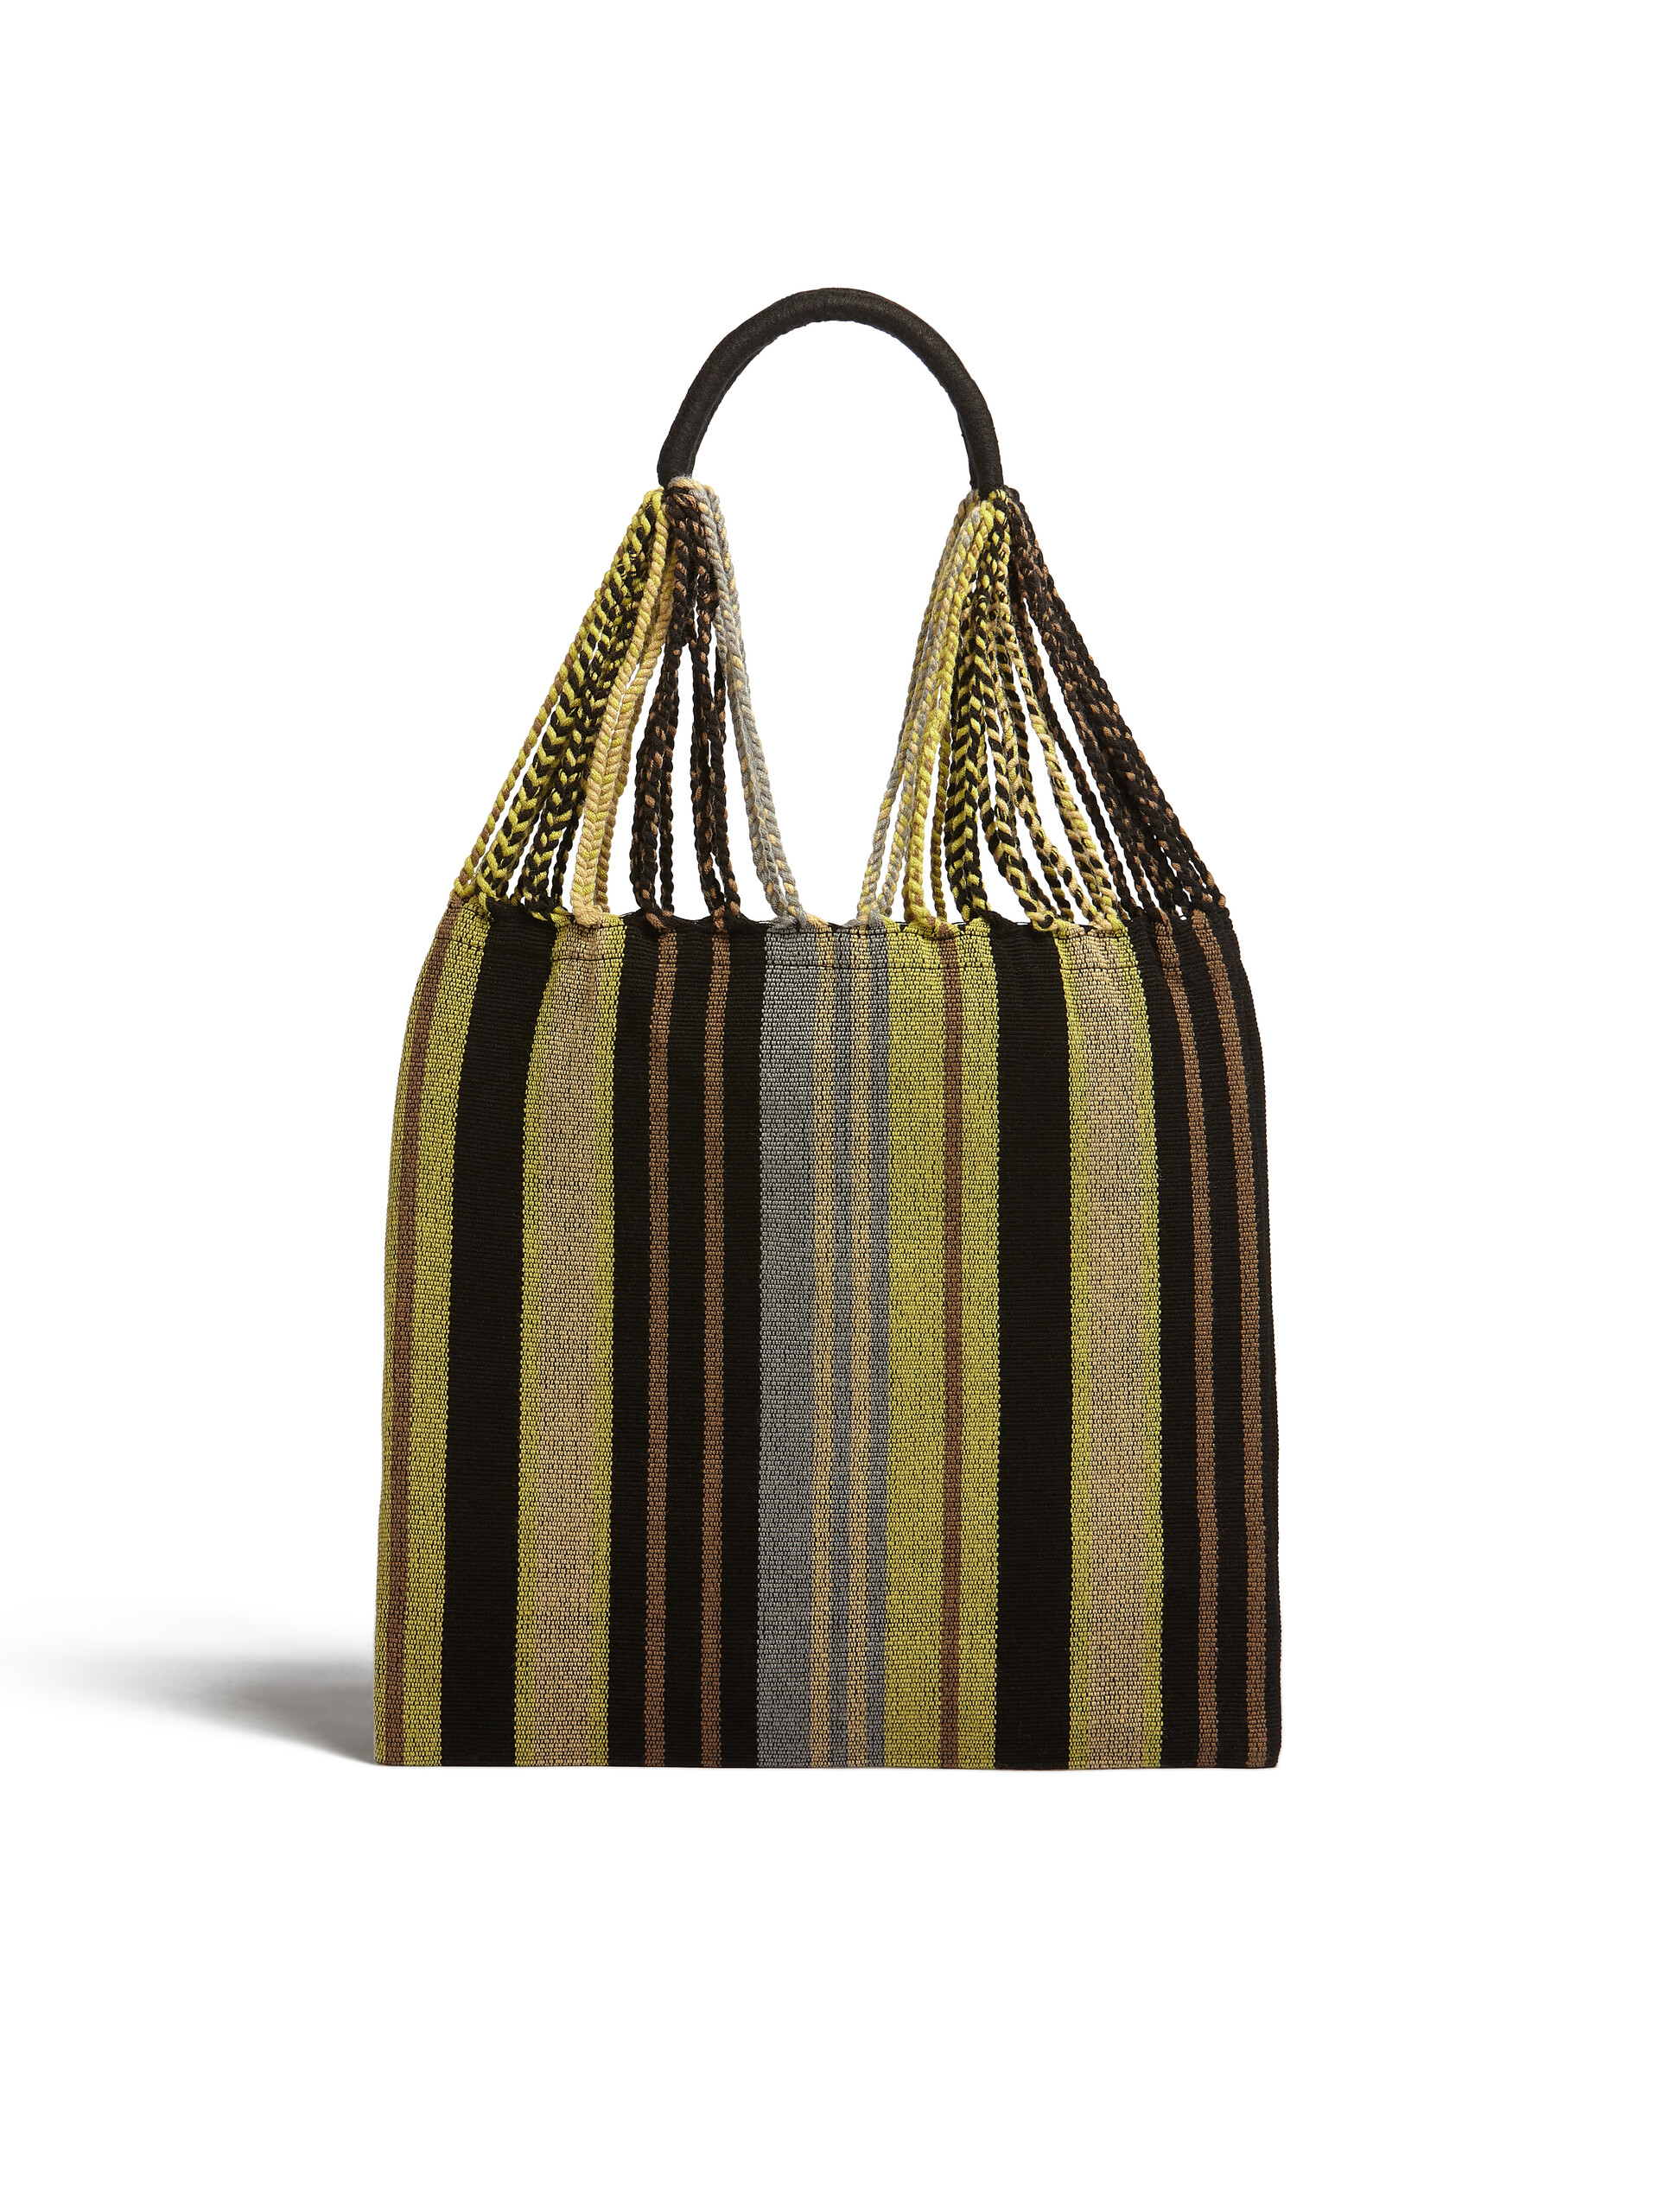 MARNI MARKET HAMMOCK bag in yellow multicolour polyester - Bags - Image 3